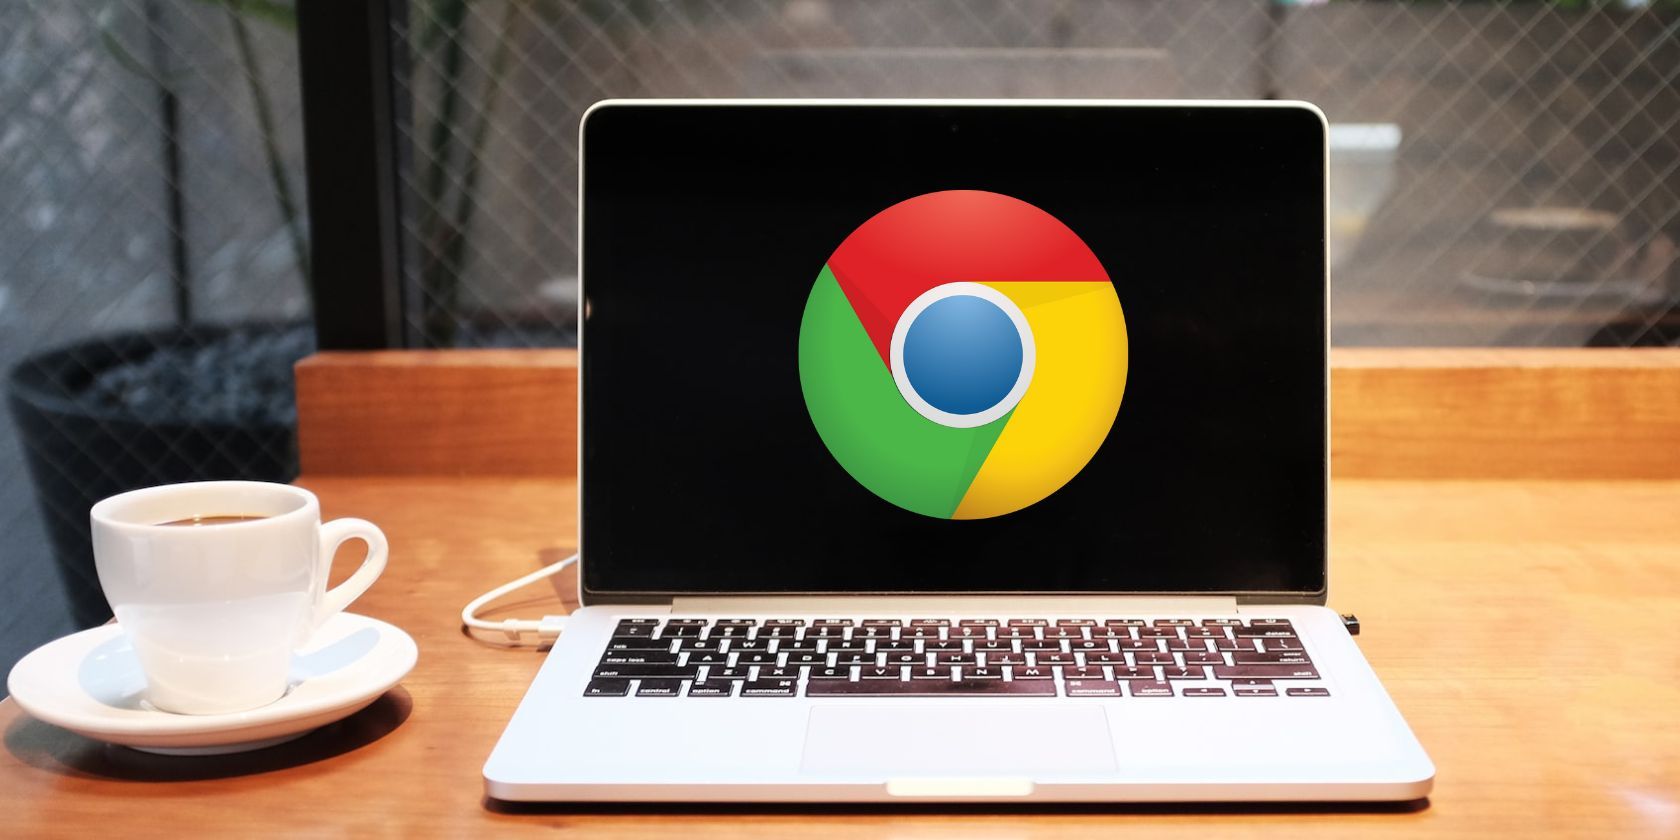 A silver laptop with a Google Chrome logo on the screen